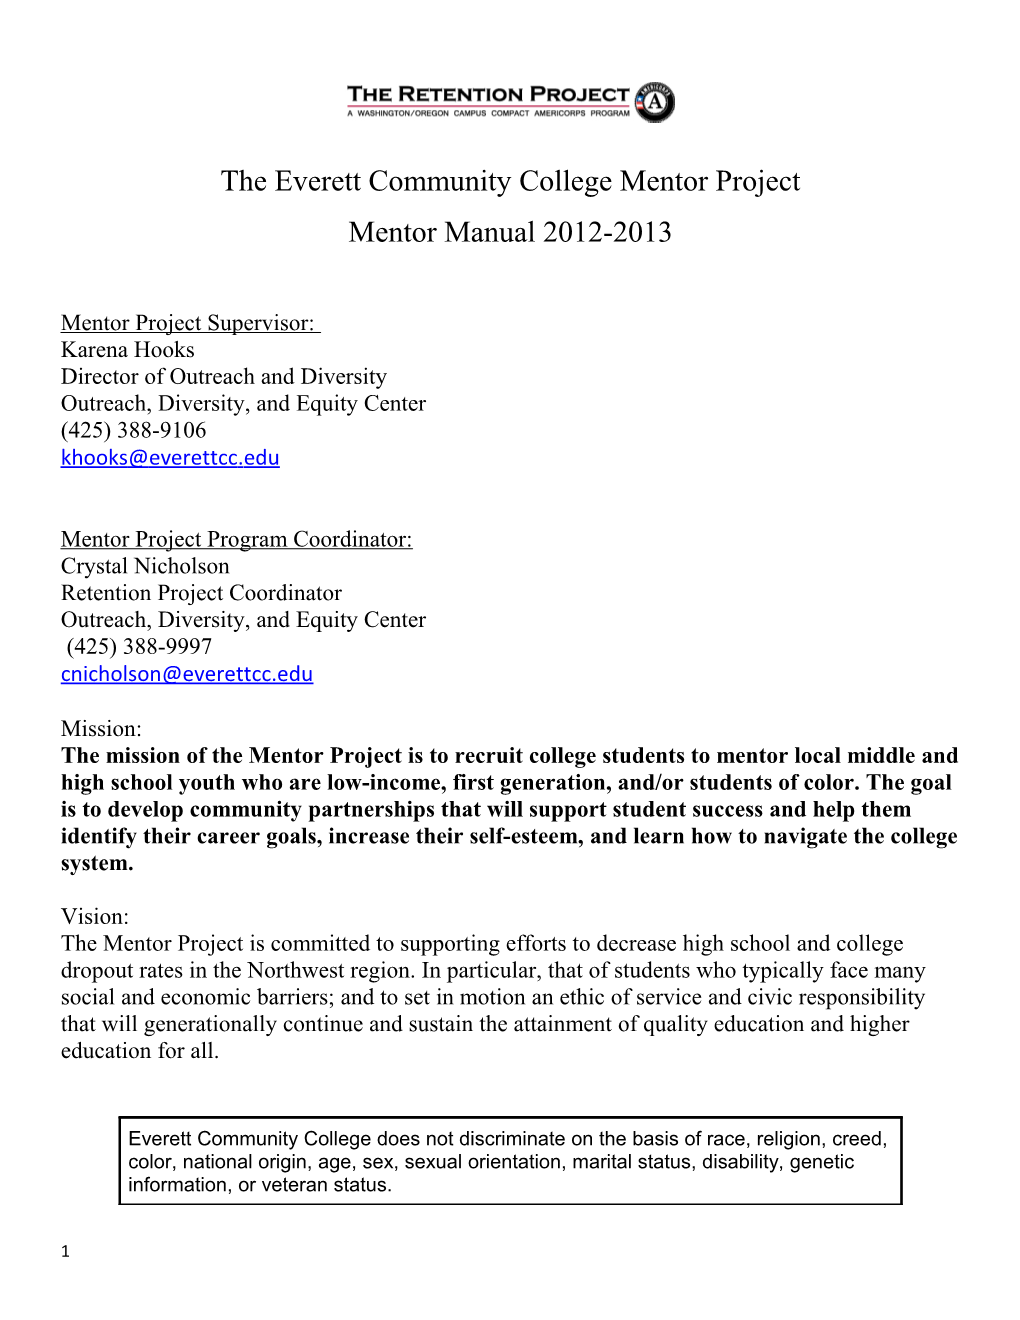 The Everett Community College Mentor Project